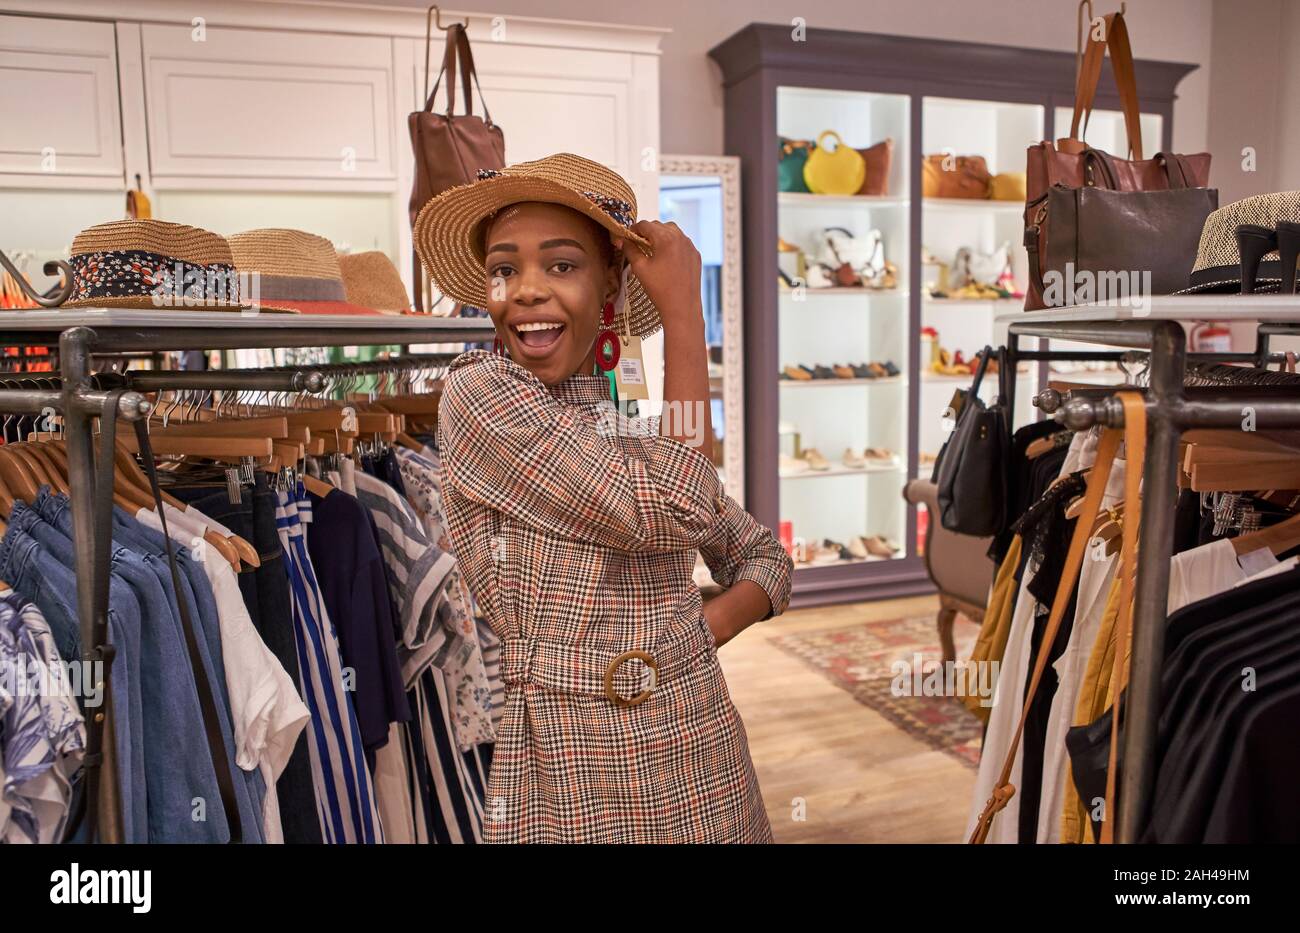 Young woman trying on a hat at a clothing shop Stock Photo